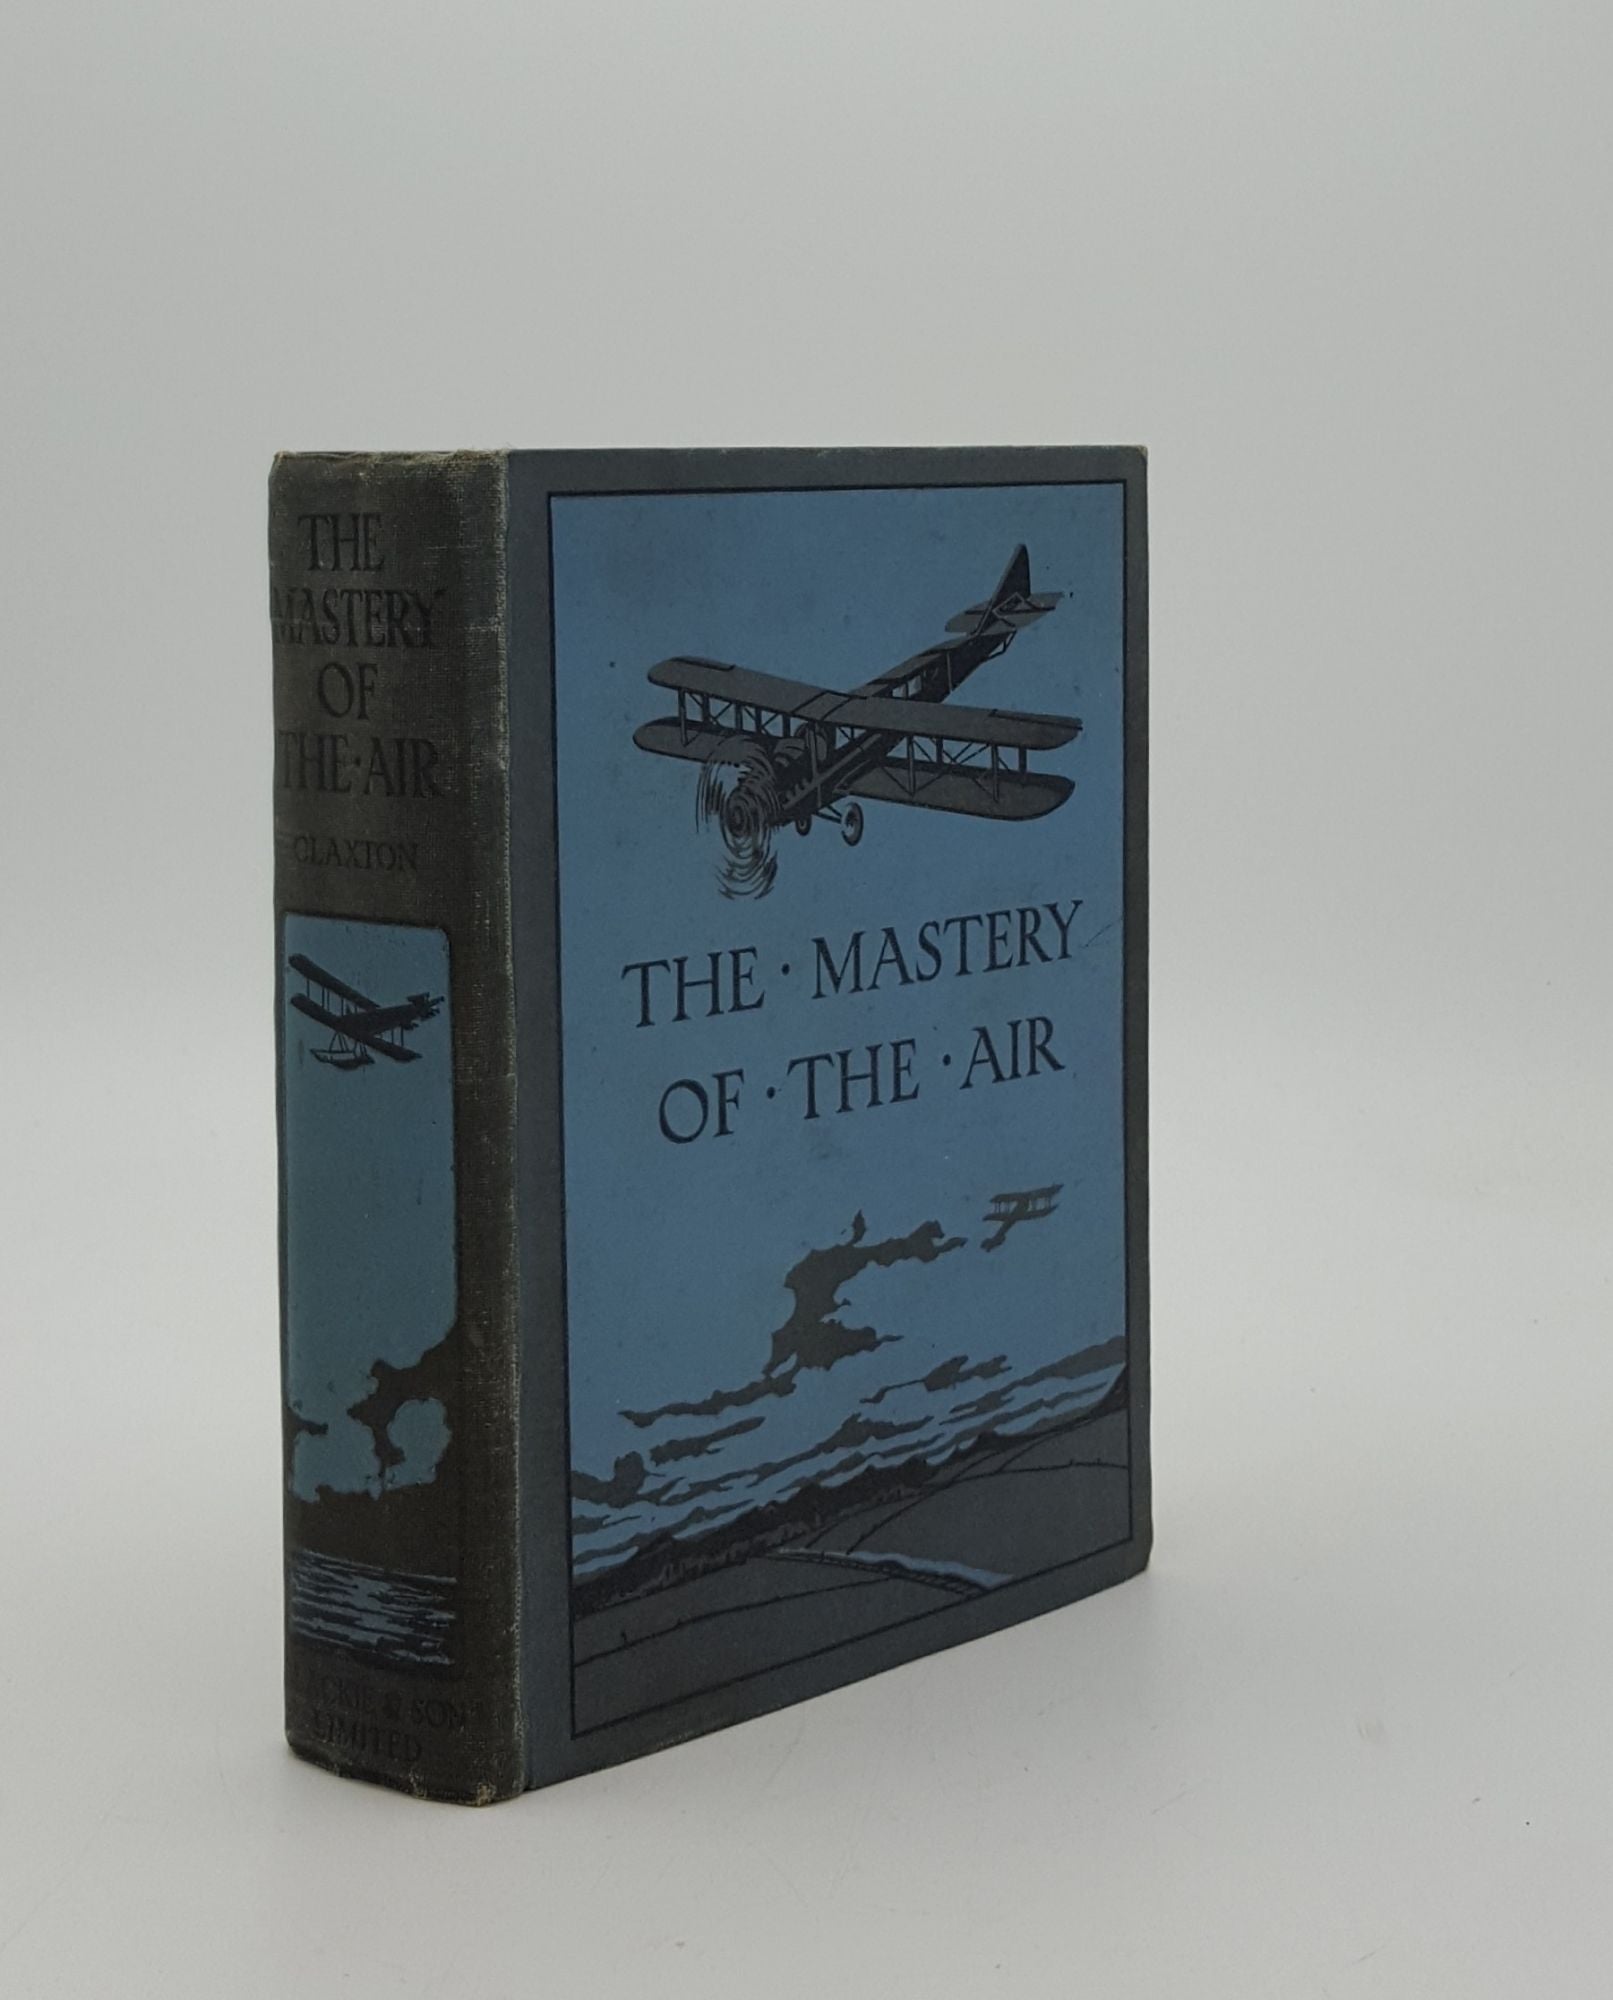 CLAXTON William J. - The Mastery of the Air